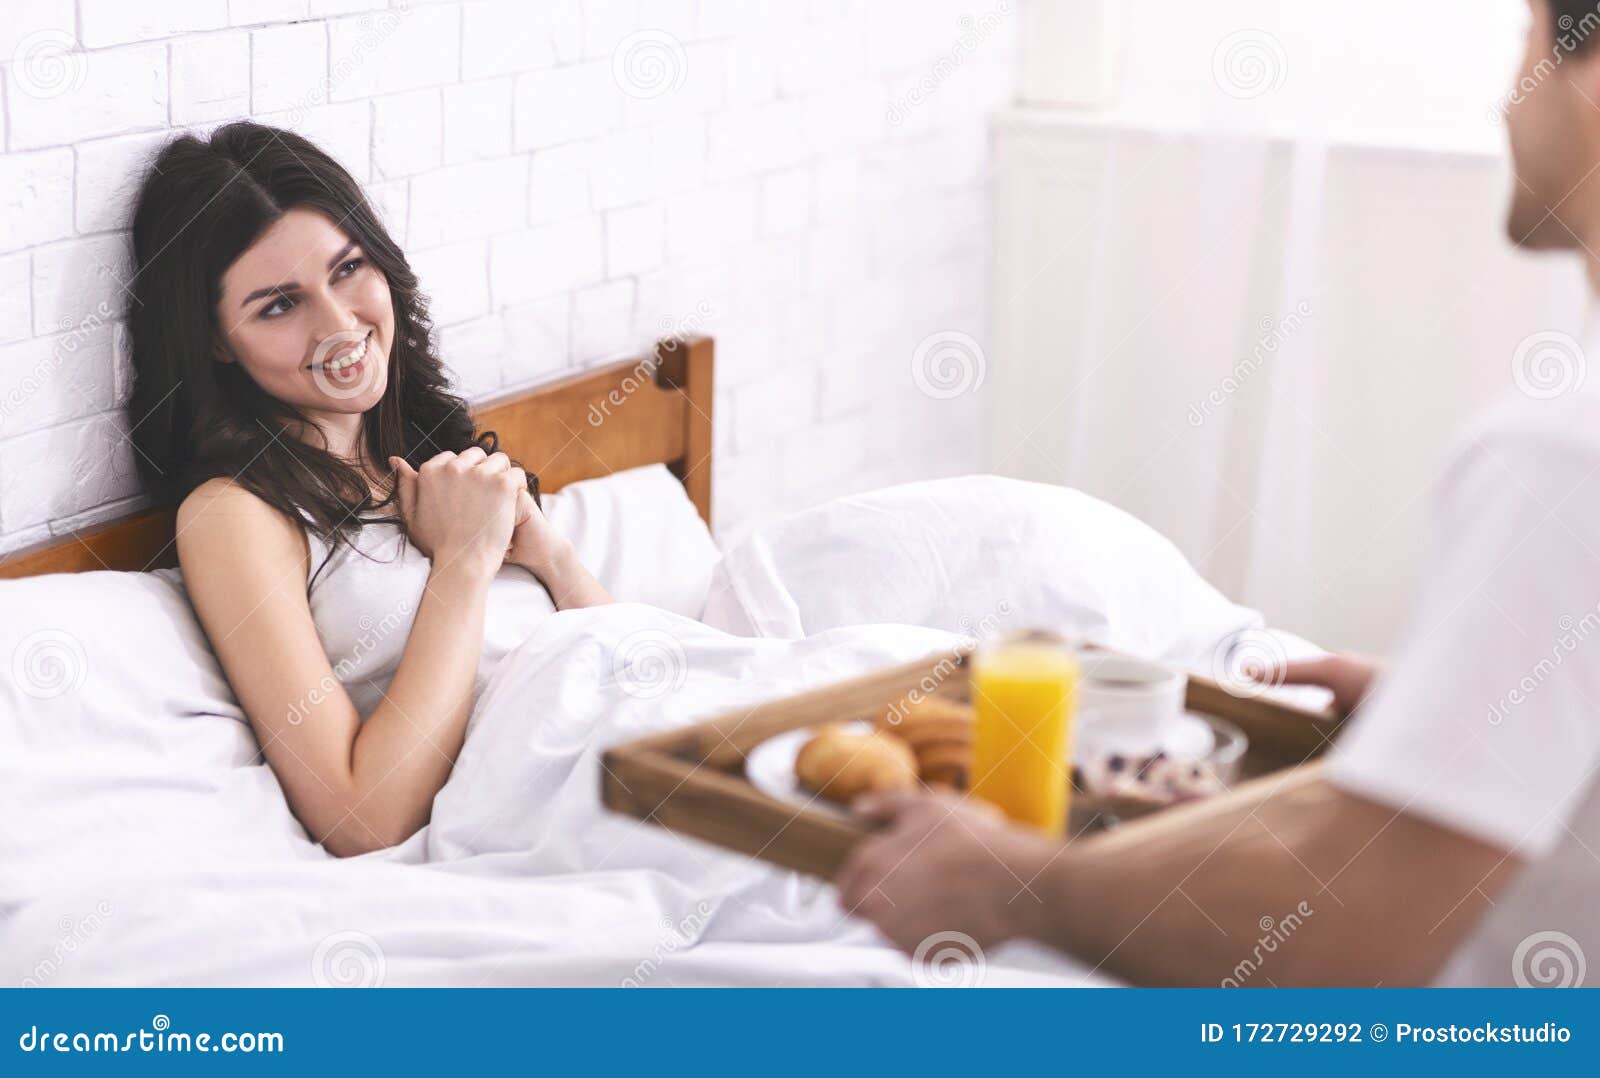 Loving Husband Bringing Breakfast in Bed for His Wife Stock Photo ...